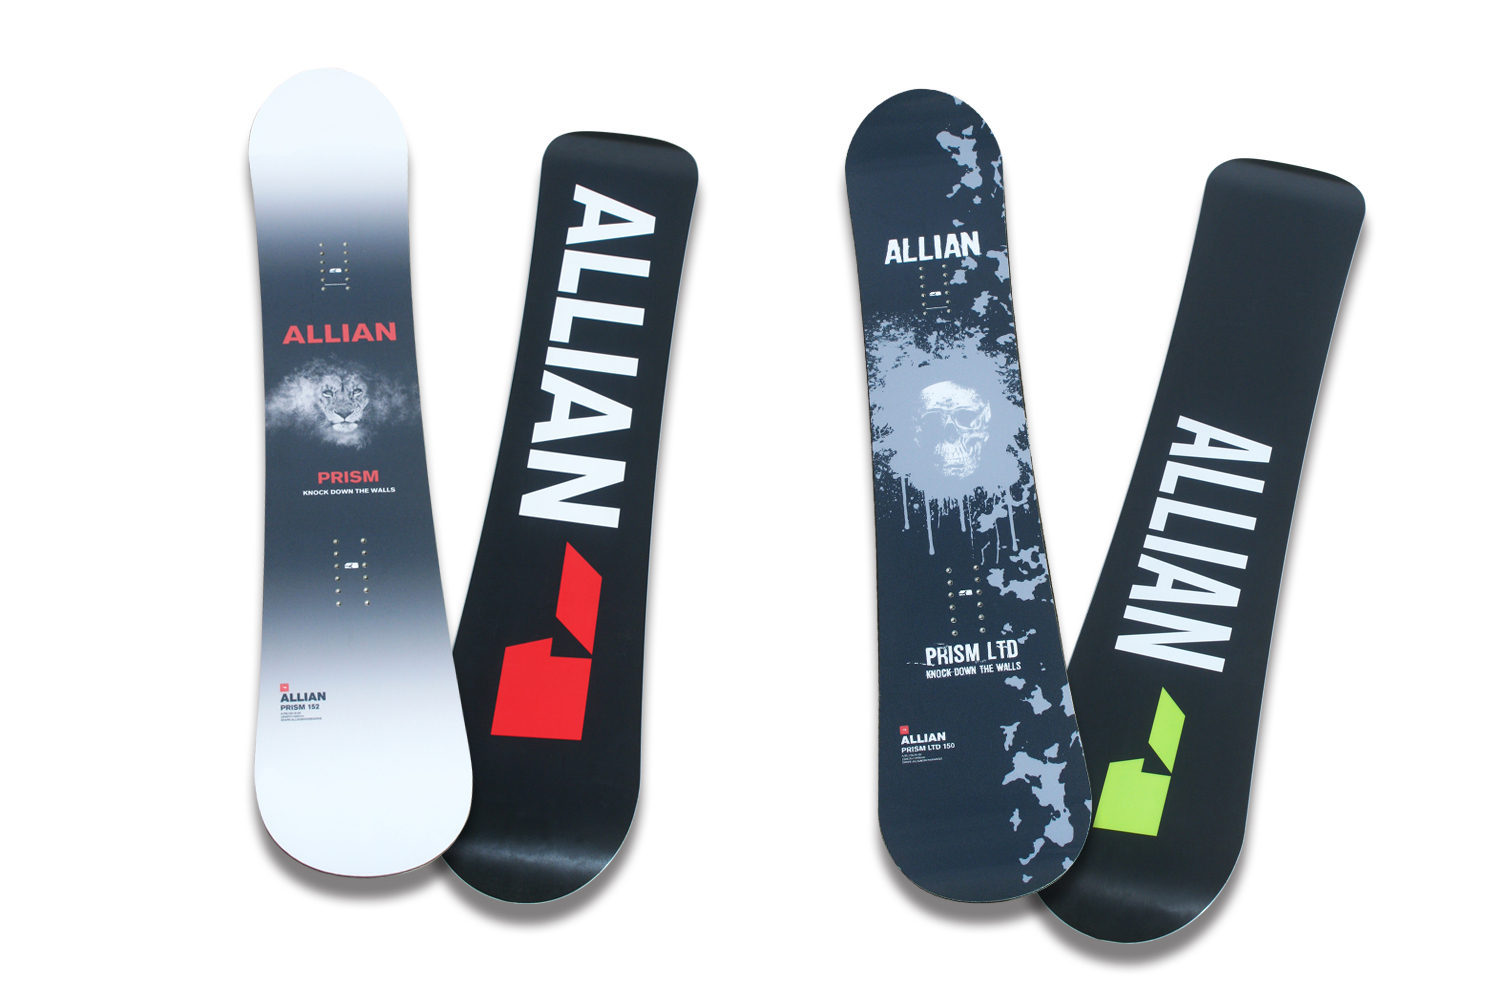 ALLIAN's proud high-speed riding, the popular all-round board